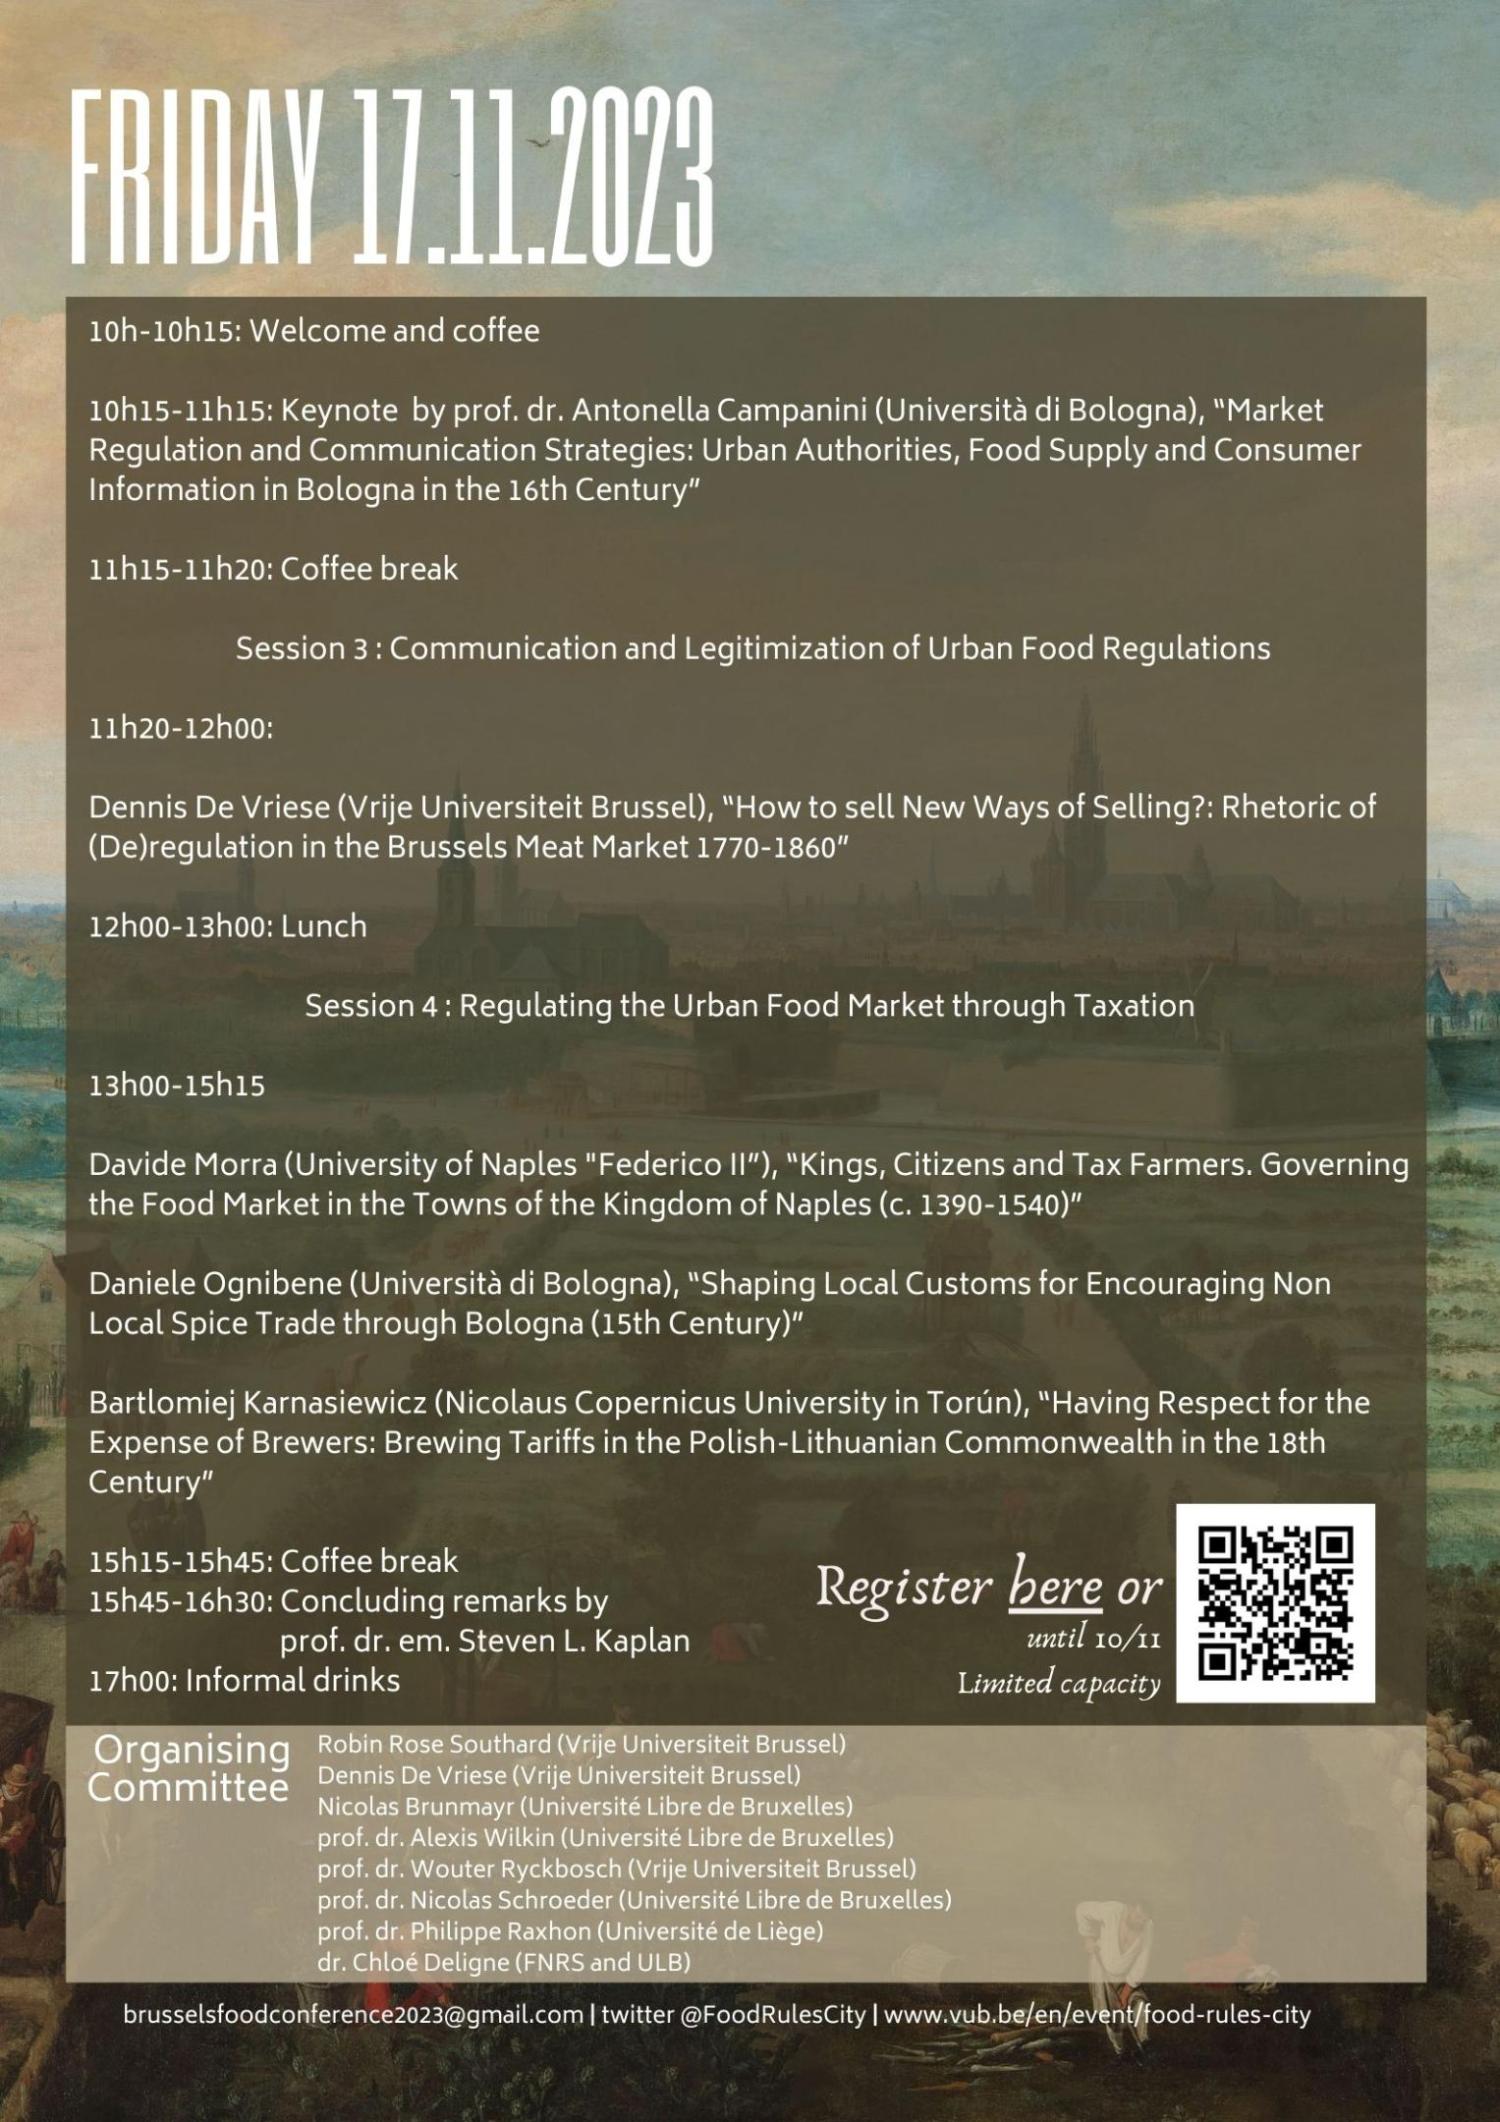 Conference 'Food, Rules, and the City' Programme 